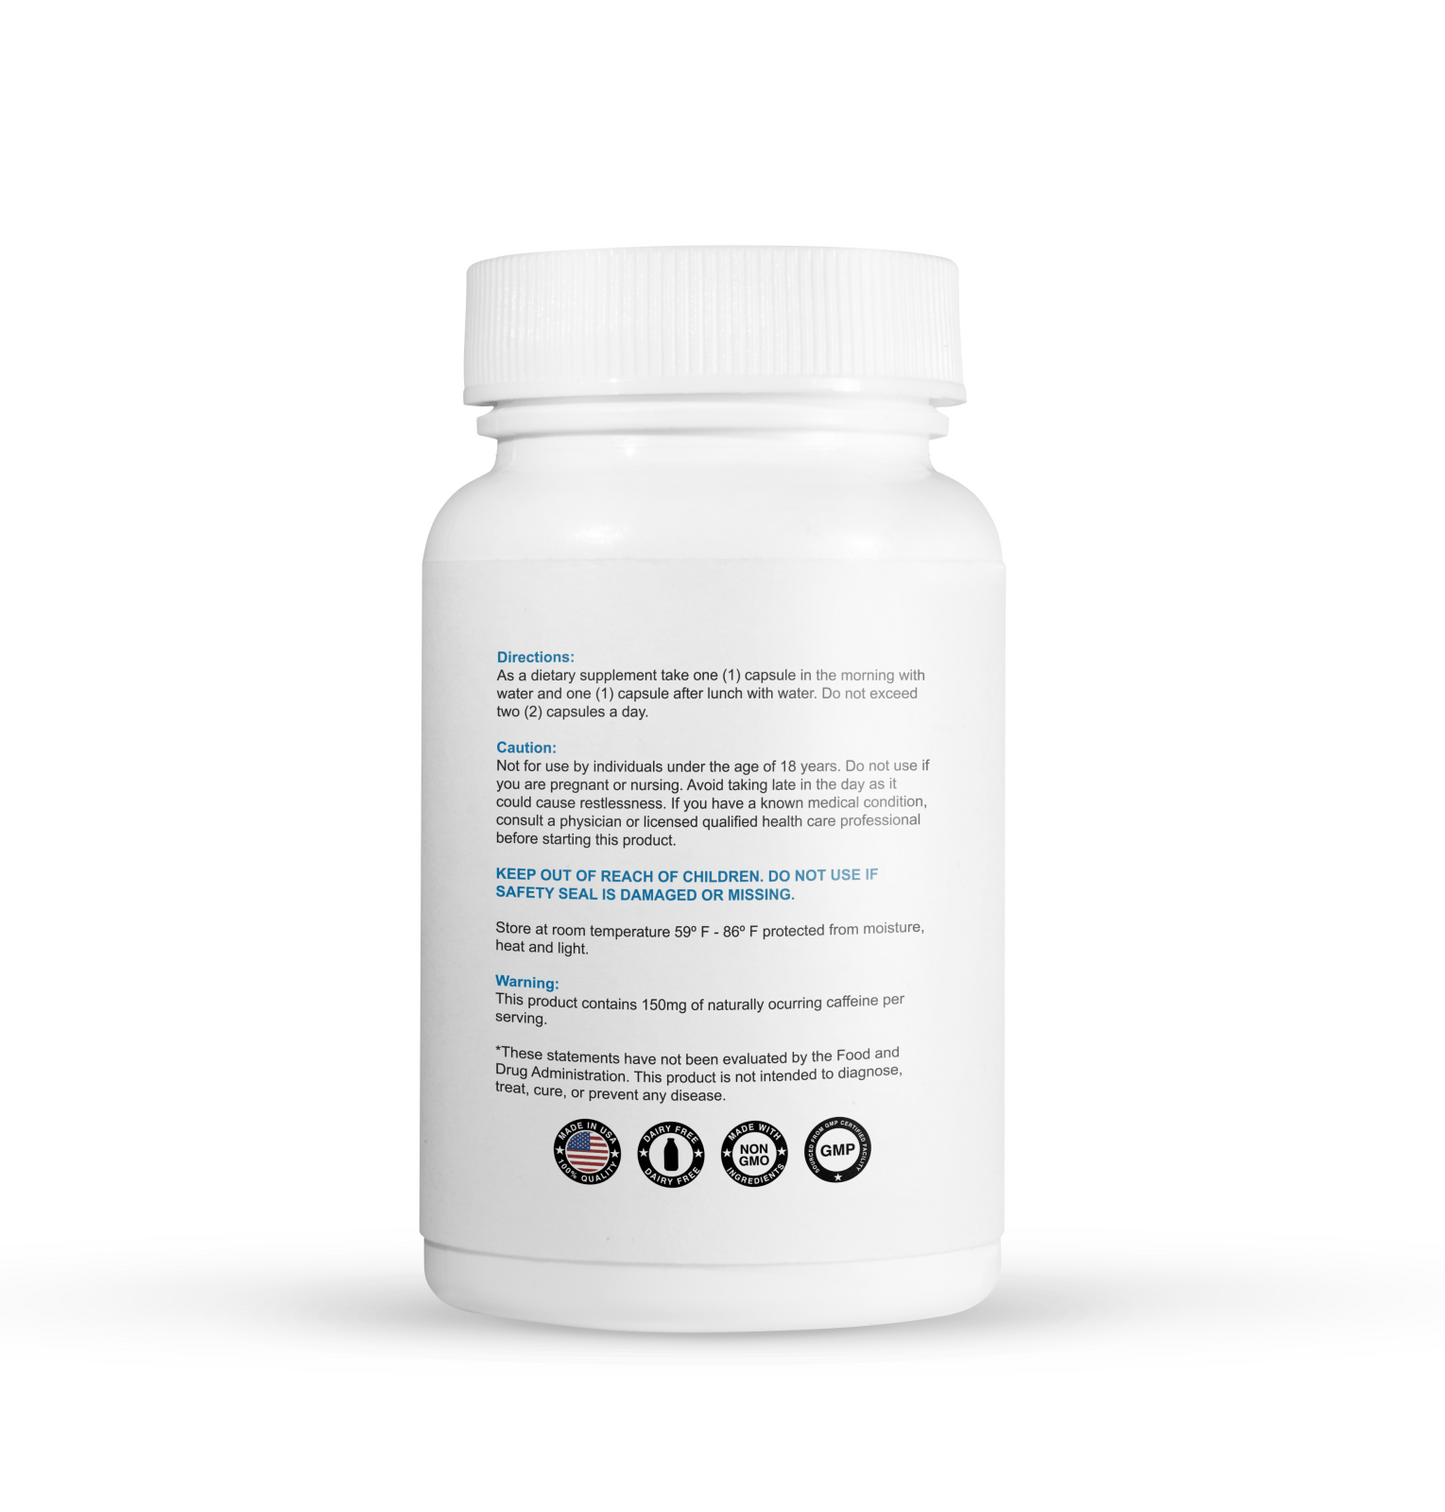 
                  
                    Phentra 37.5  240 Capsules - 4 Month Supply
                  
                